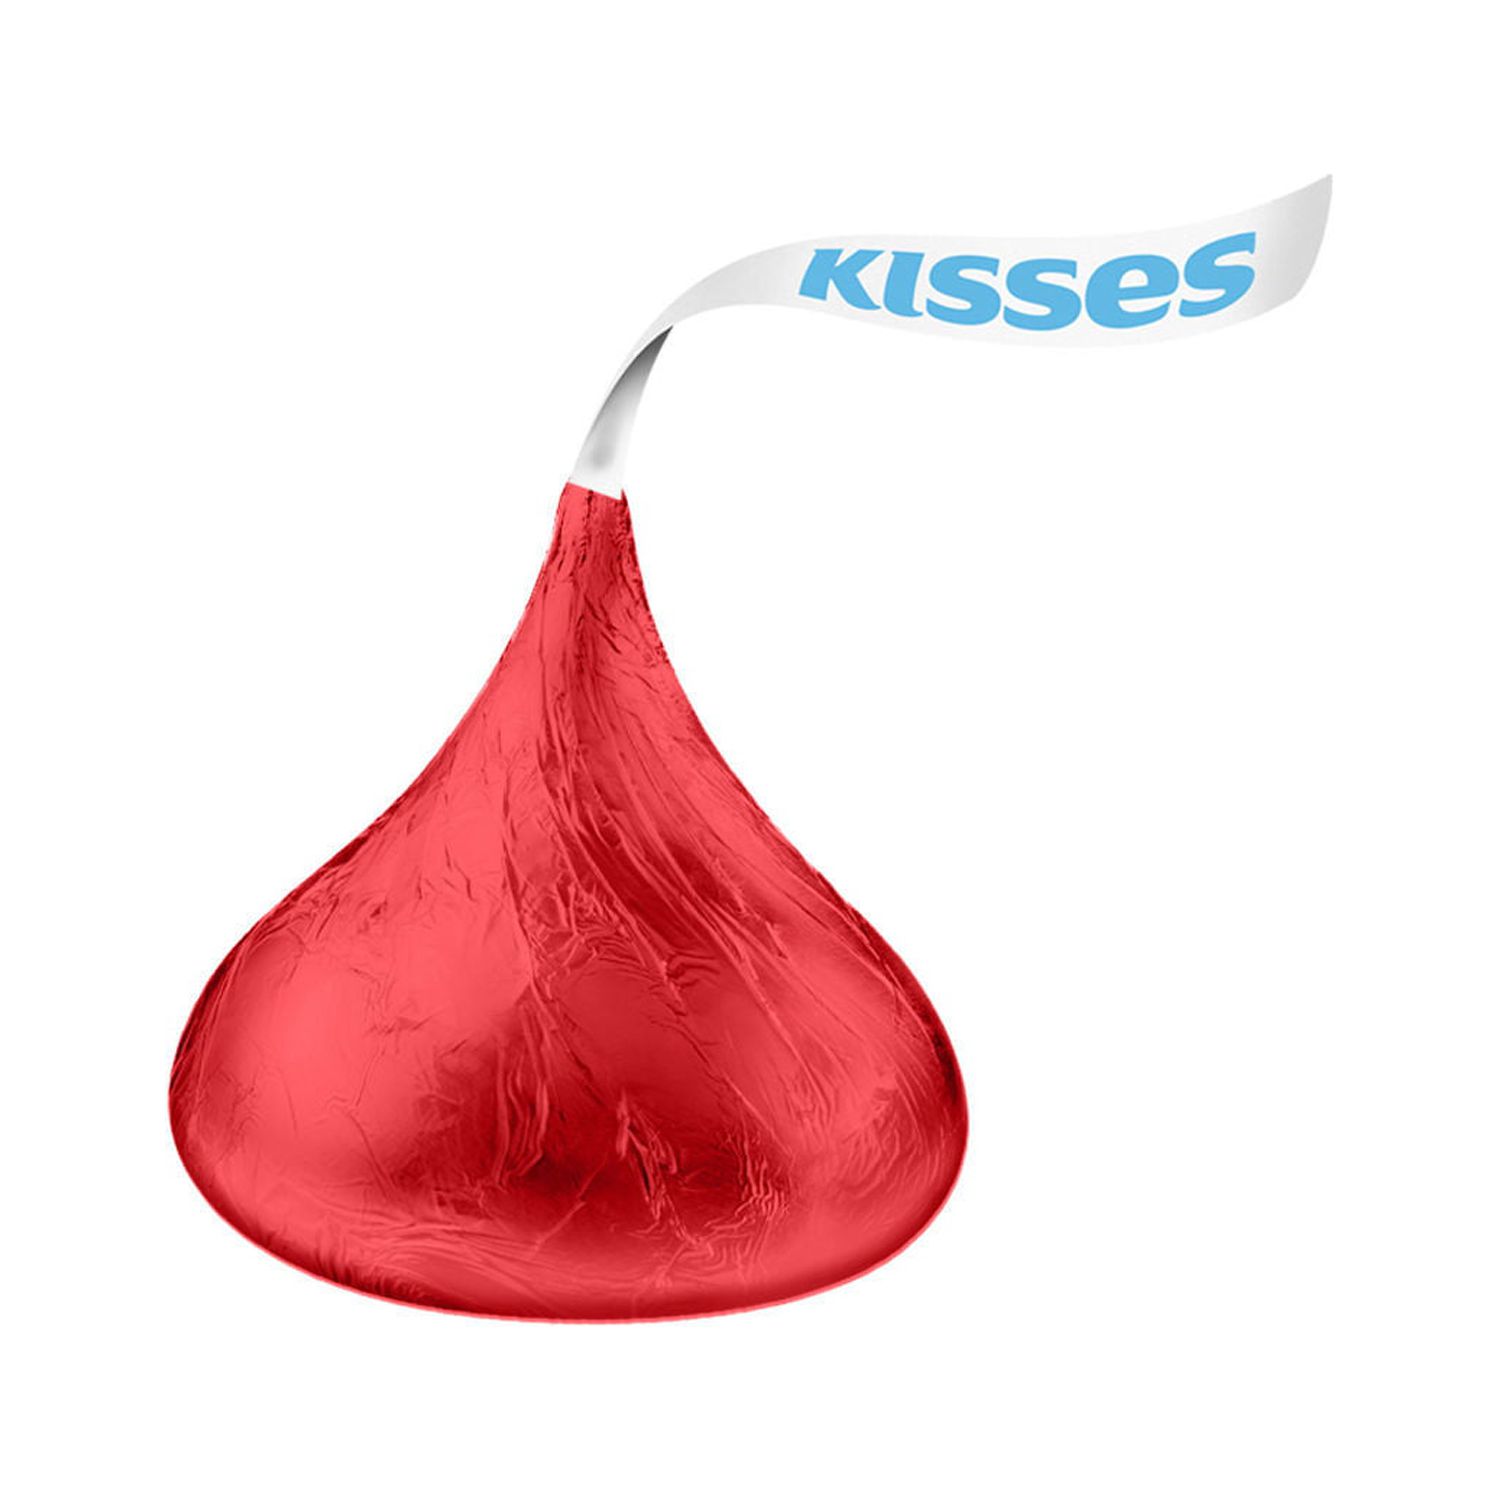 Hershey's Kisses Solid Milk Chocolate Valentine's Day Candy, Gift Box 7 oz - image 3 of 6